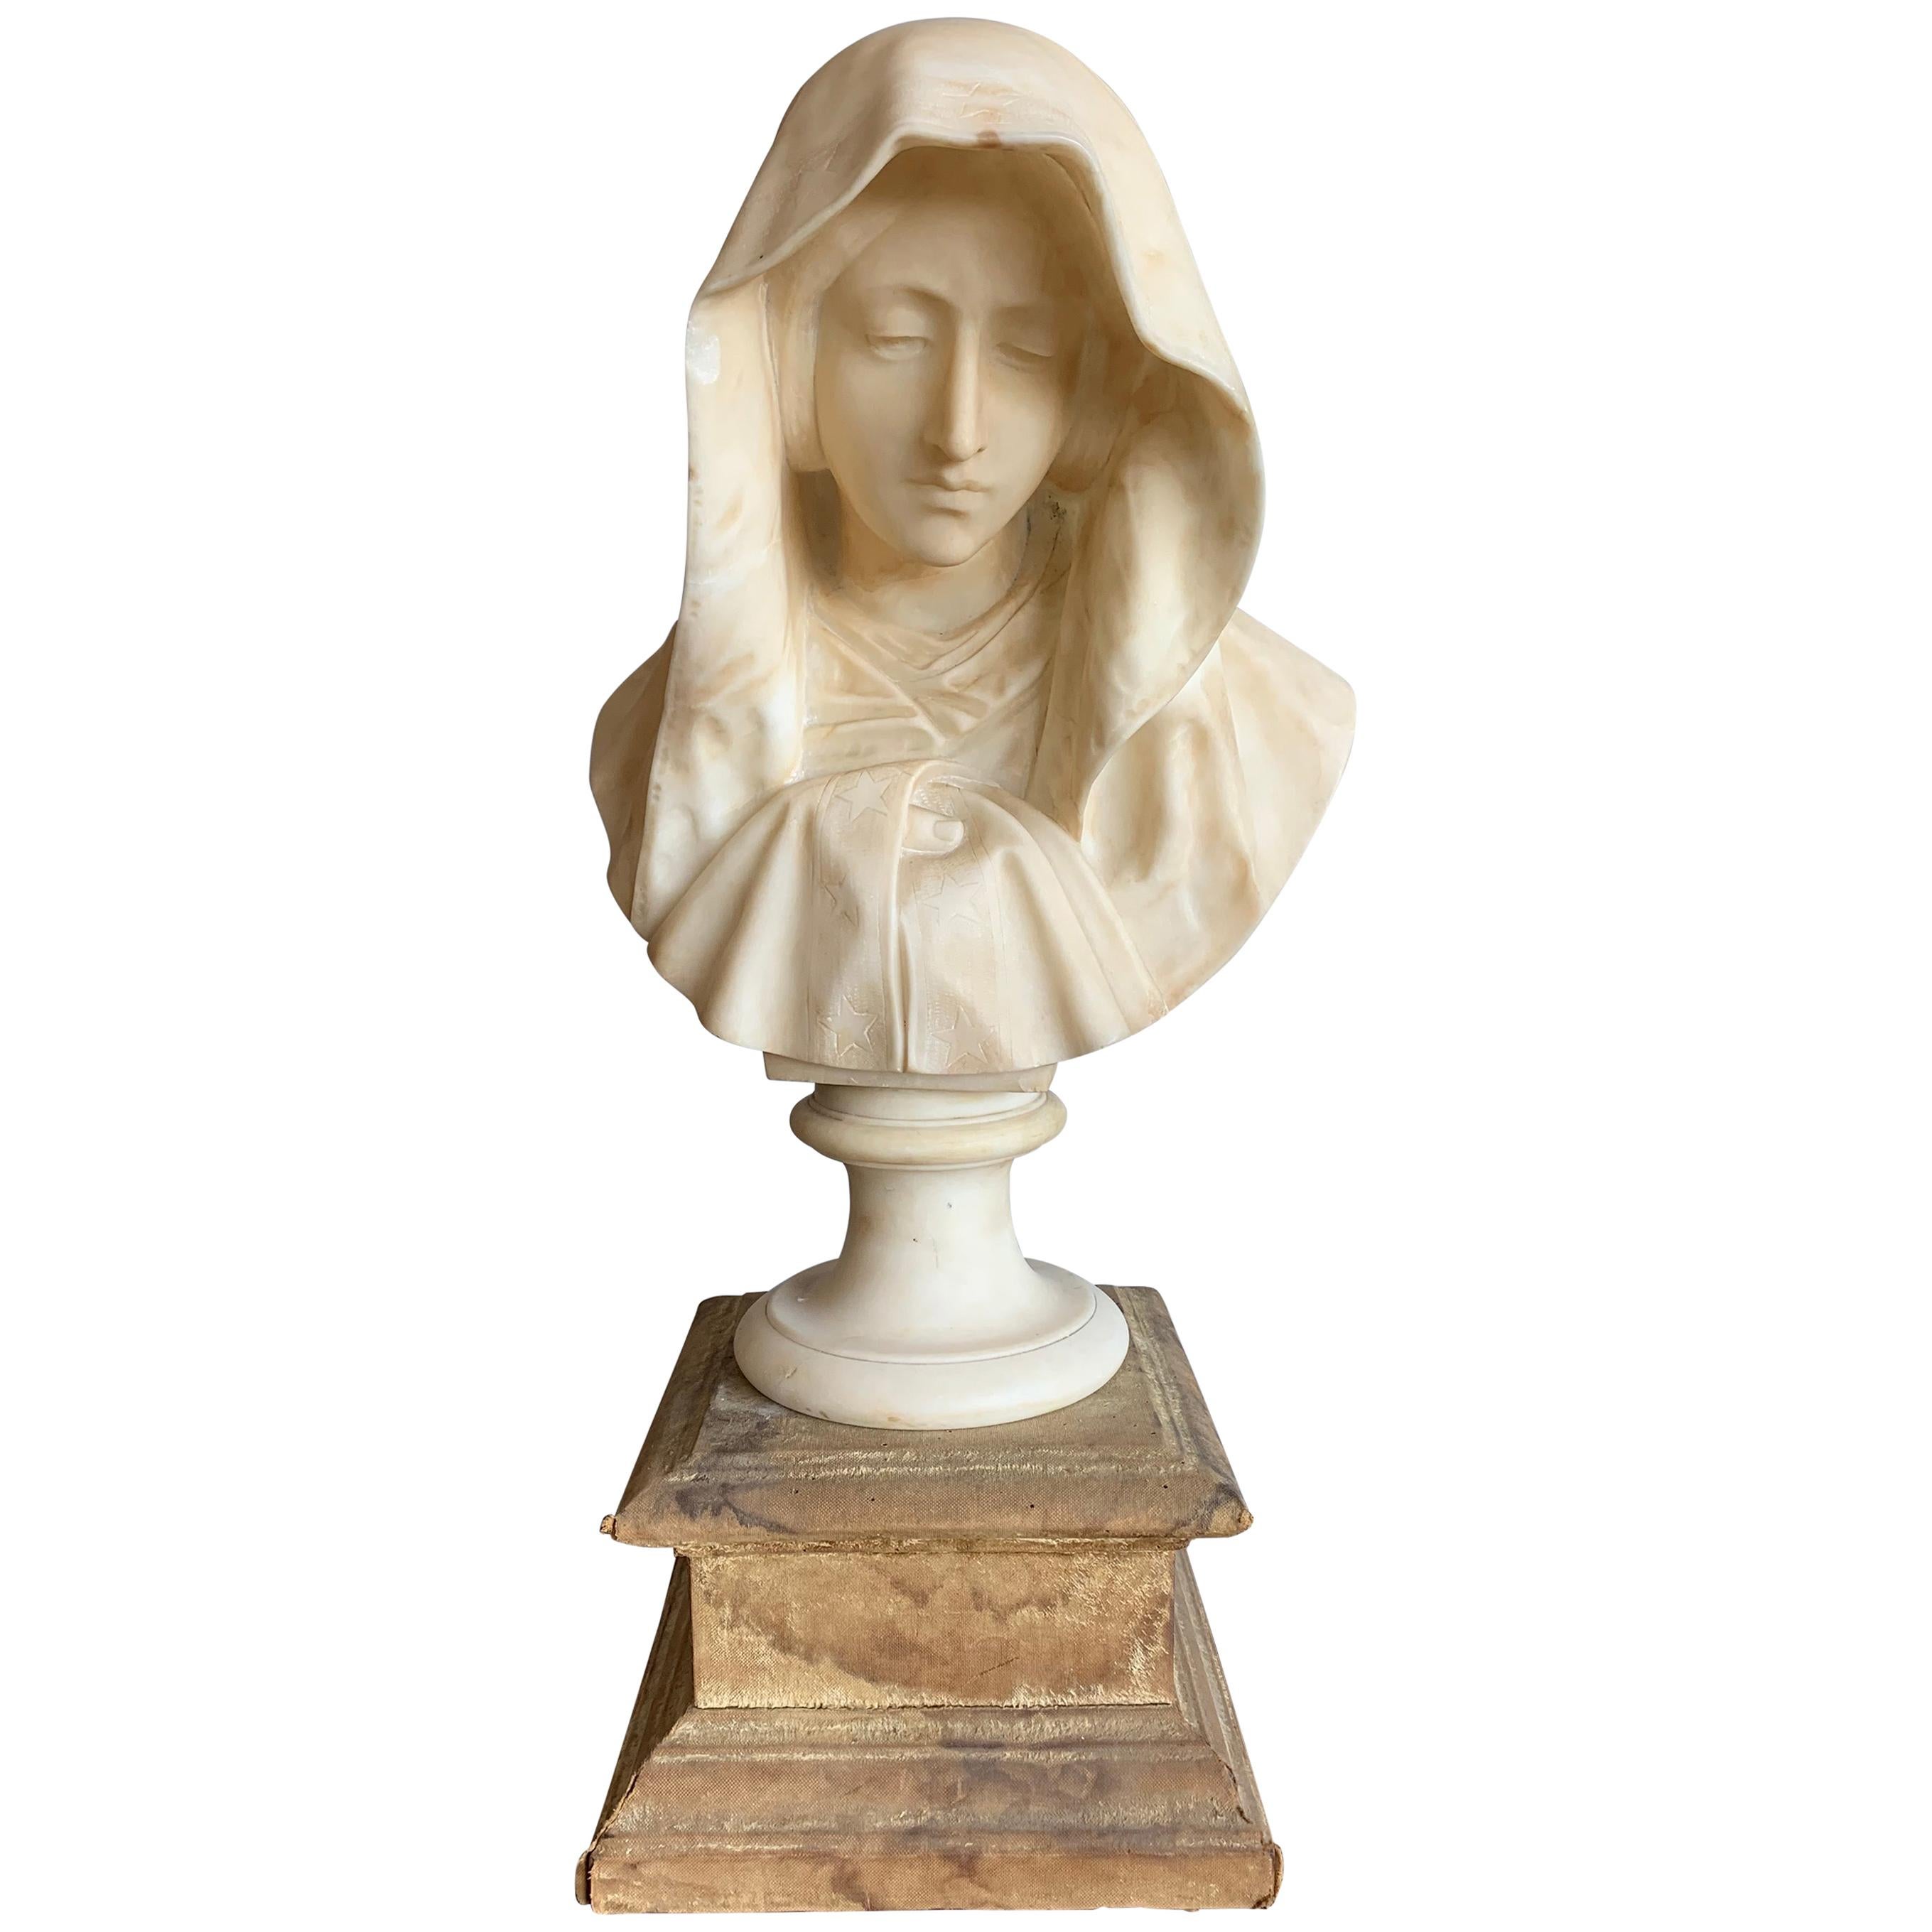 Rare and Hand Carved Early 1900 Alabaster Bust Sculpture of a Serene Virgin Mary